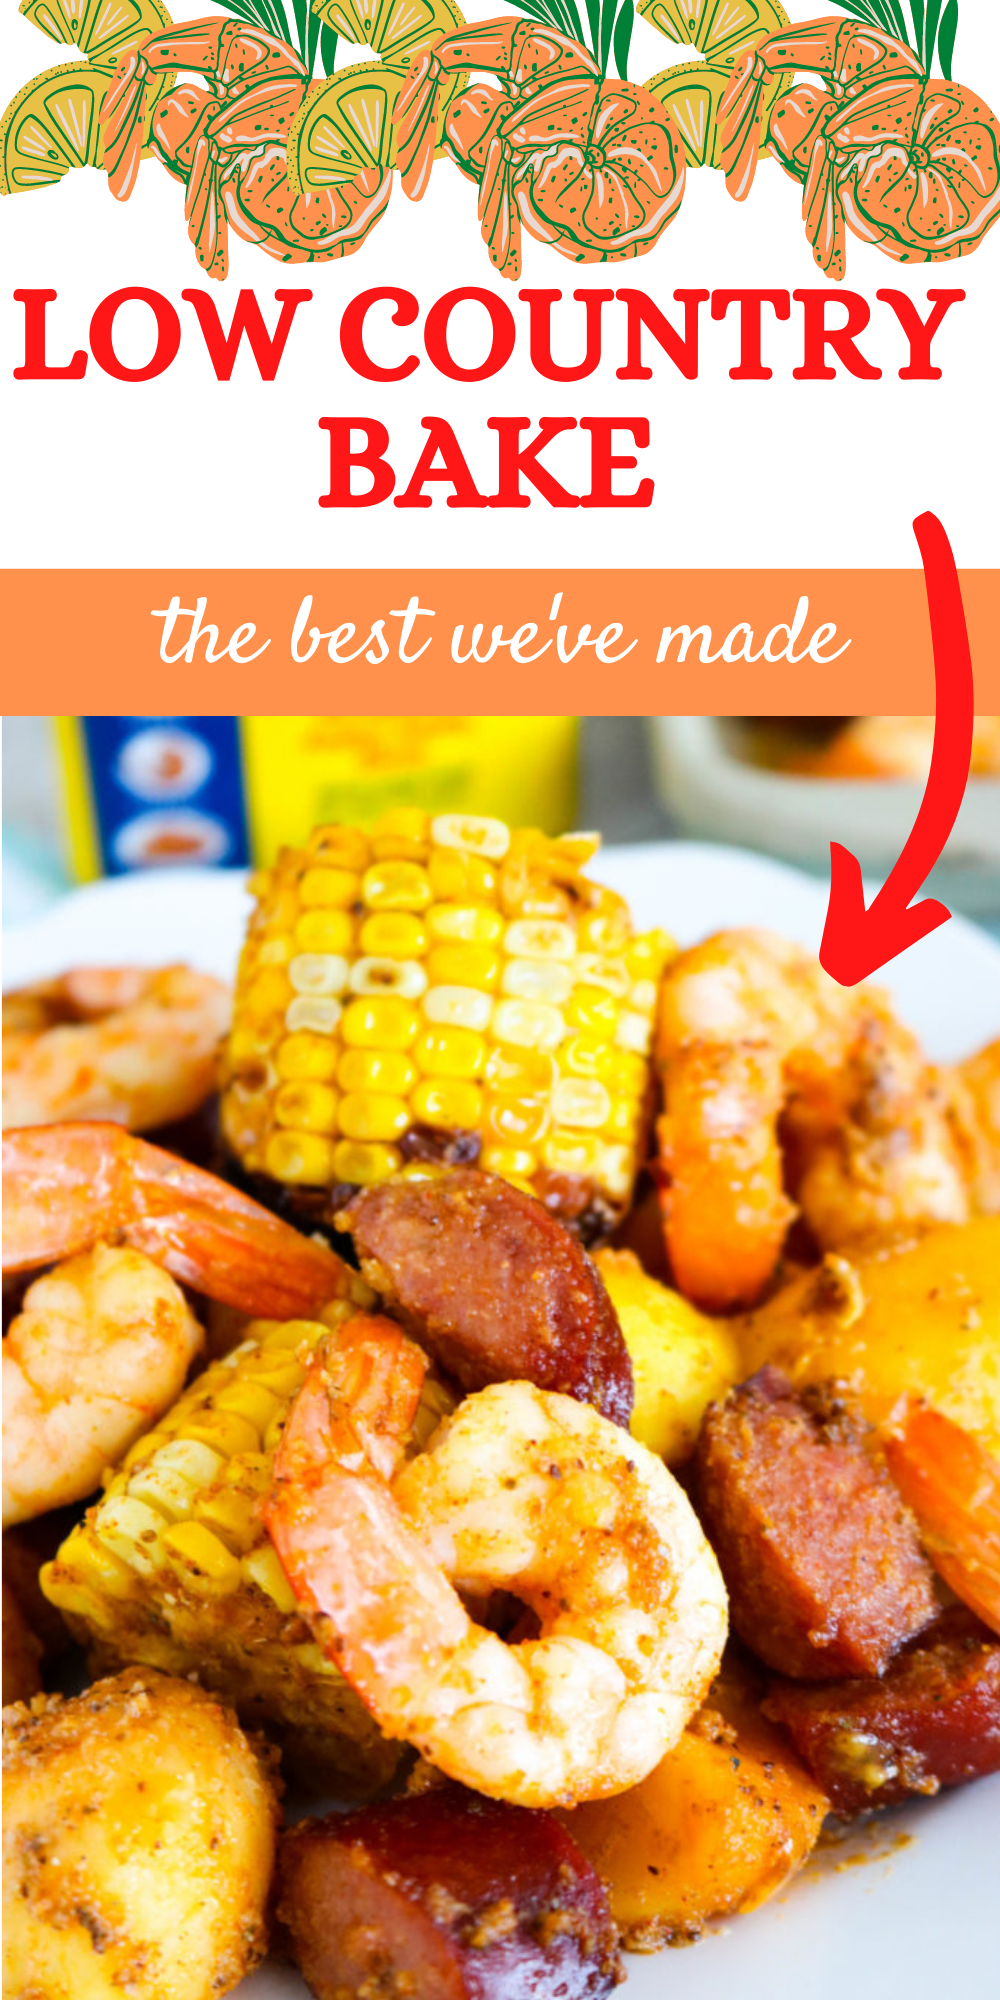 This Low Country Bake has all of the classic flavors of a Low Country Boil but it's baked in the oven and done in about 30 minutes!   via @bigbearswife